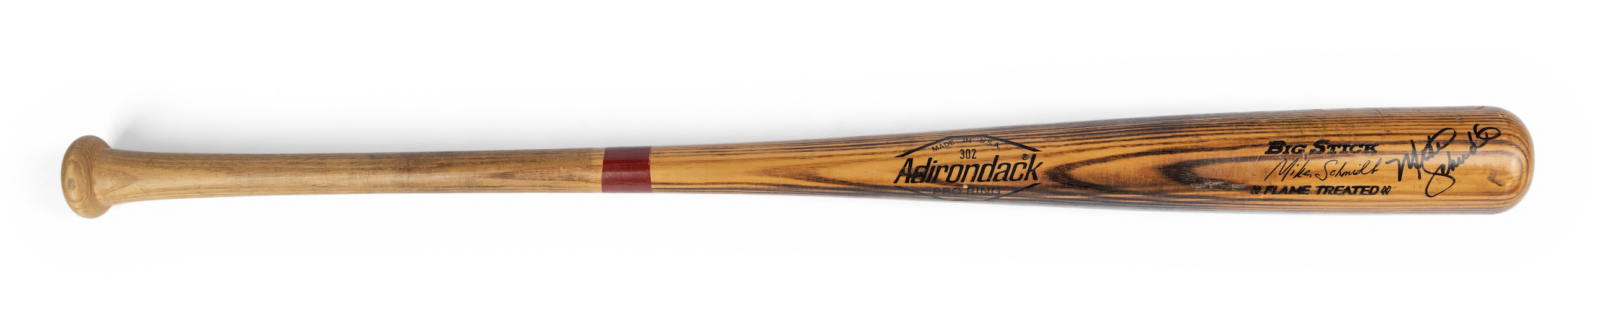 Mike Schmidt 1982 game-used and signed Adirondack bat (MEARS A9), estimated at $4,000-$6,000. Image courtesy of Hindman